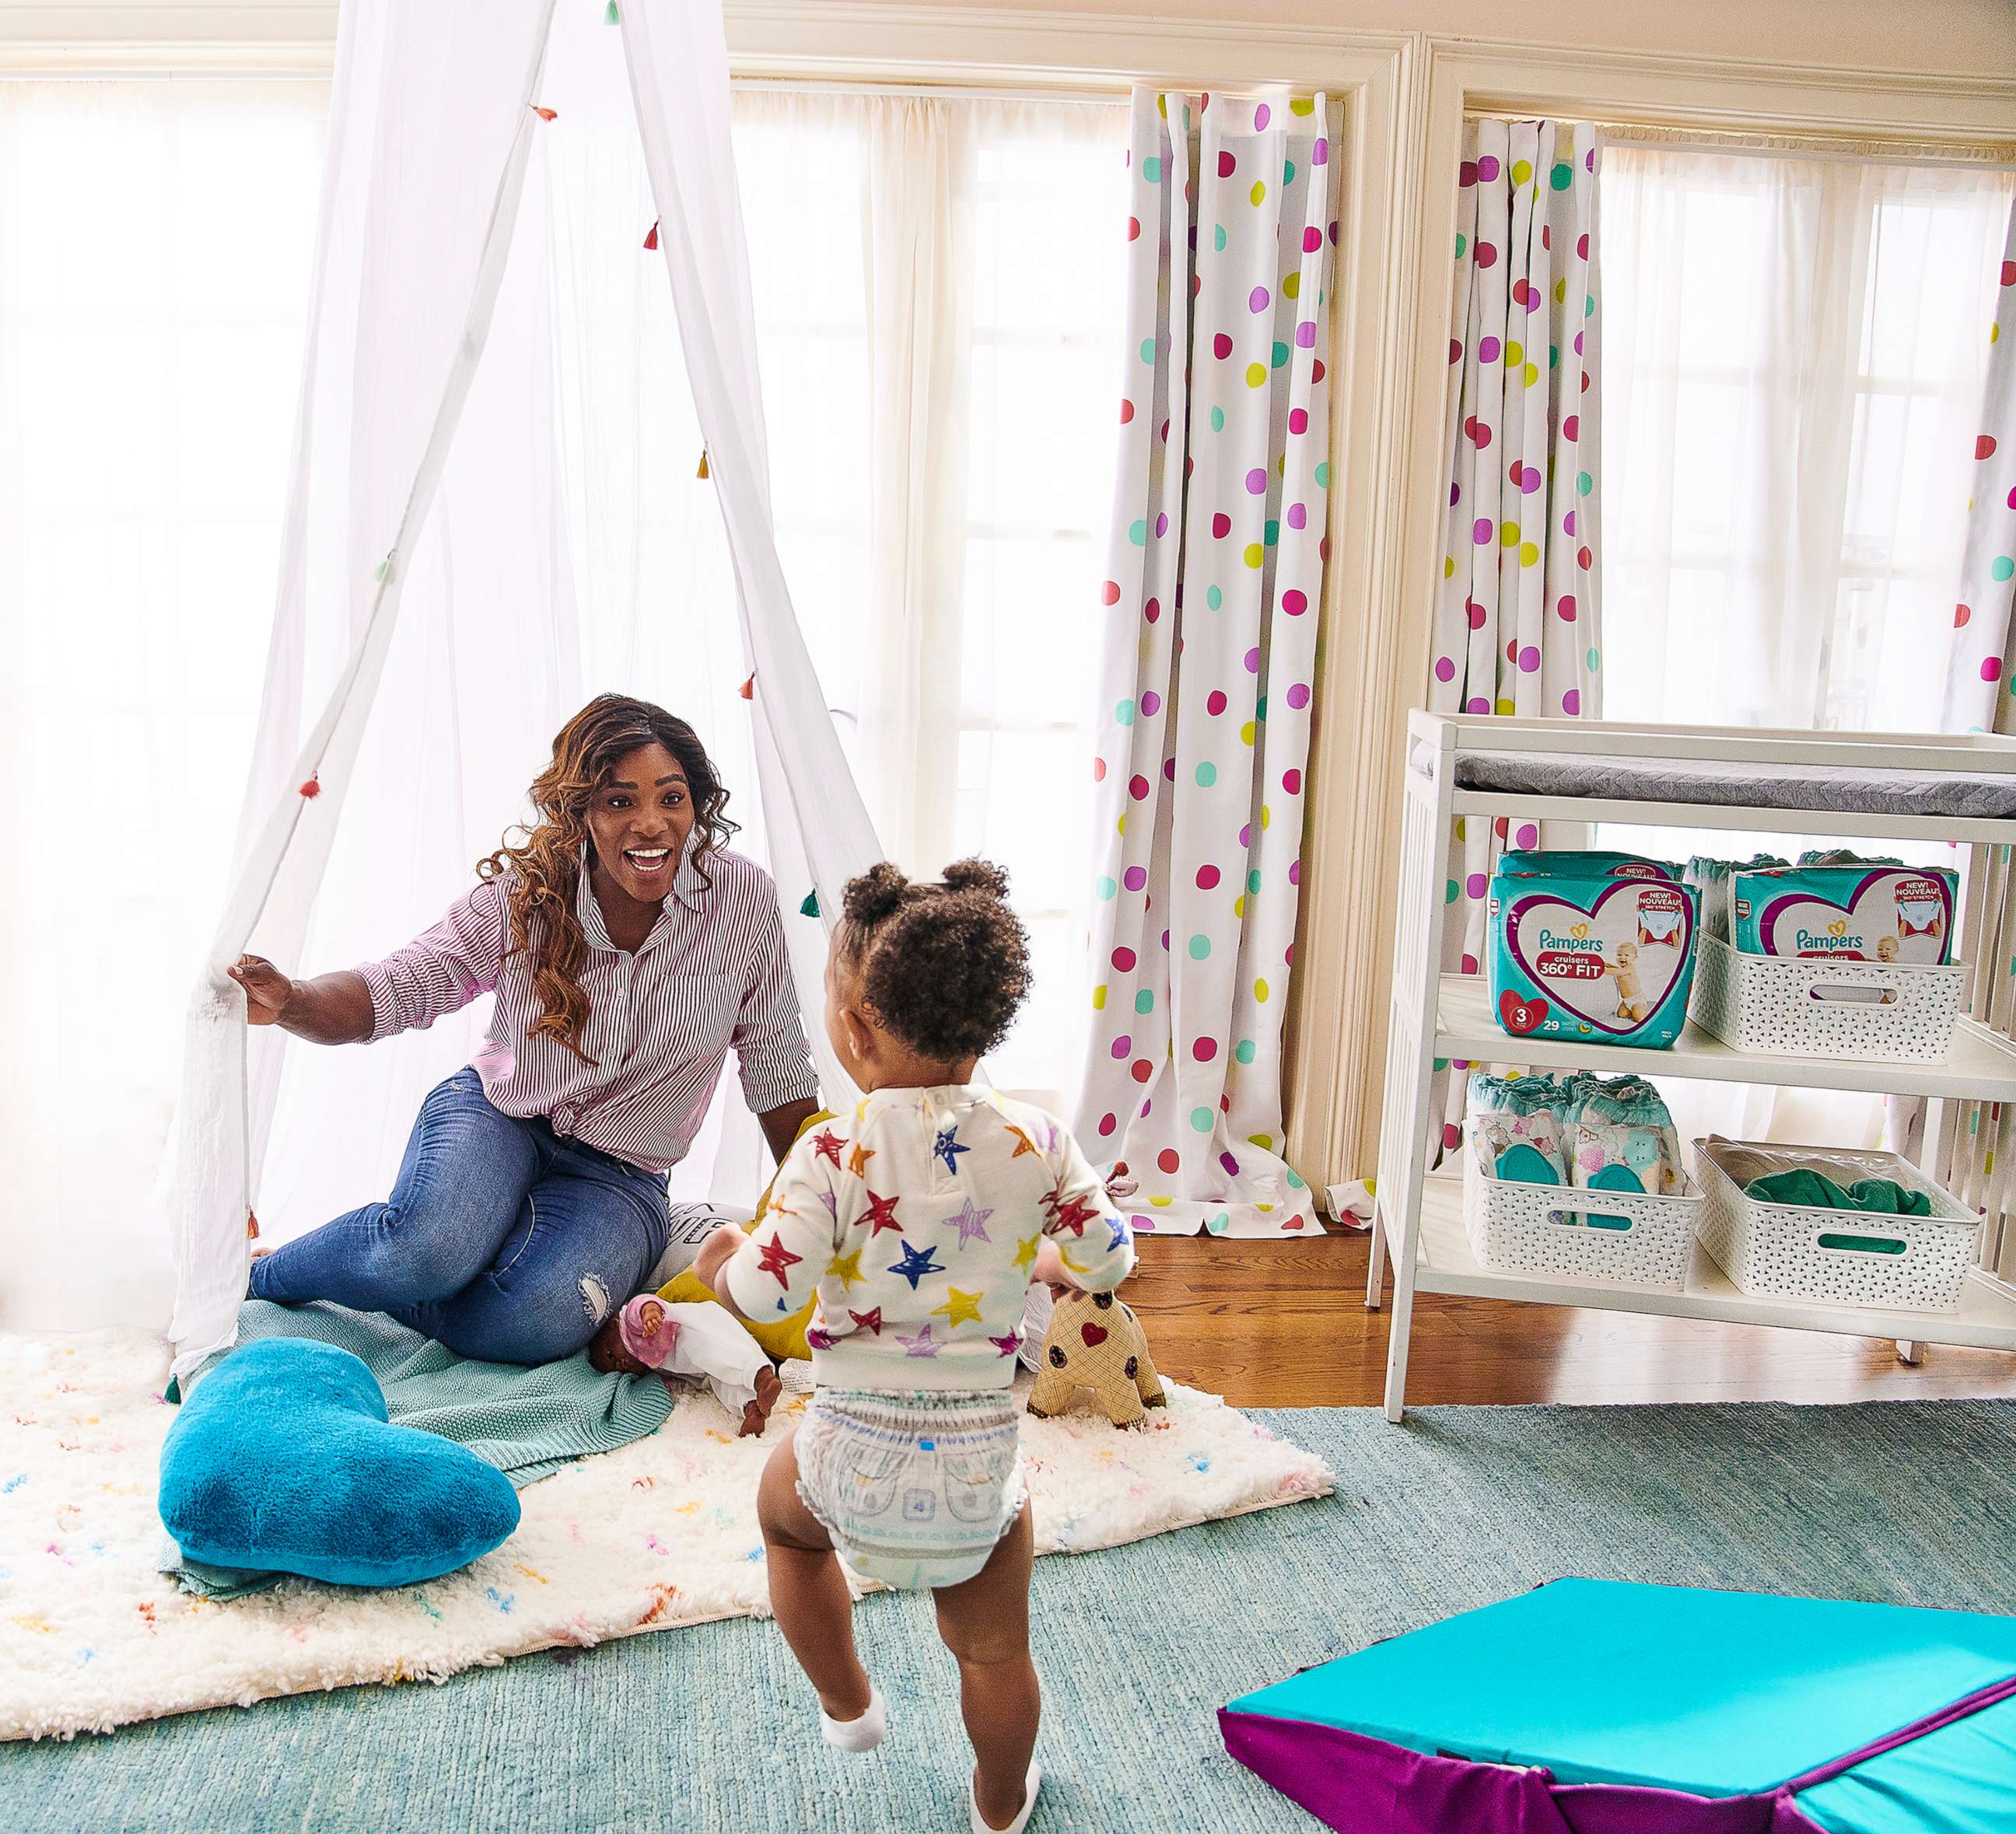 PHOTO: Serena Williams, the mother of Alexis Olympia, has partnered with Pampers on its 'Born to Be Wild" campaign.